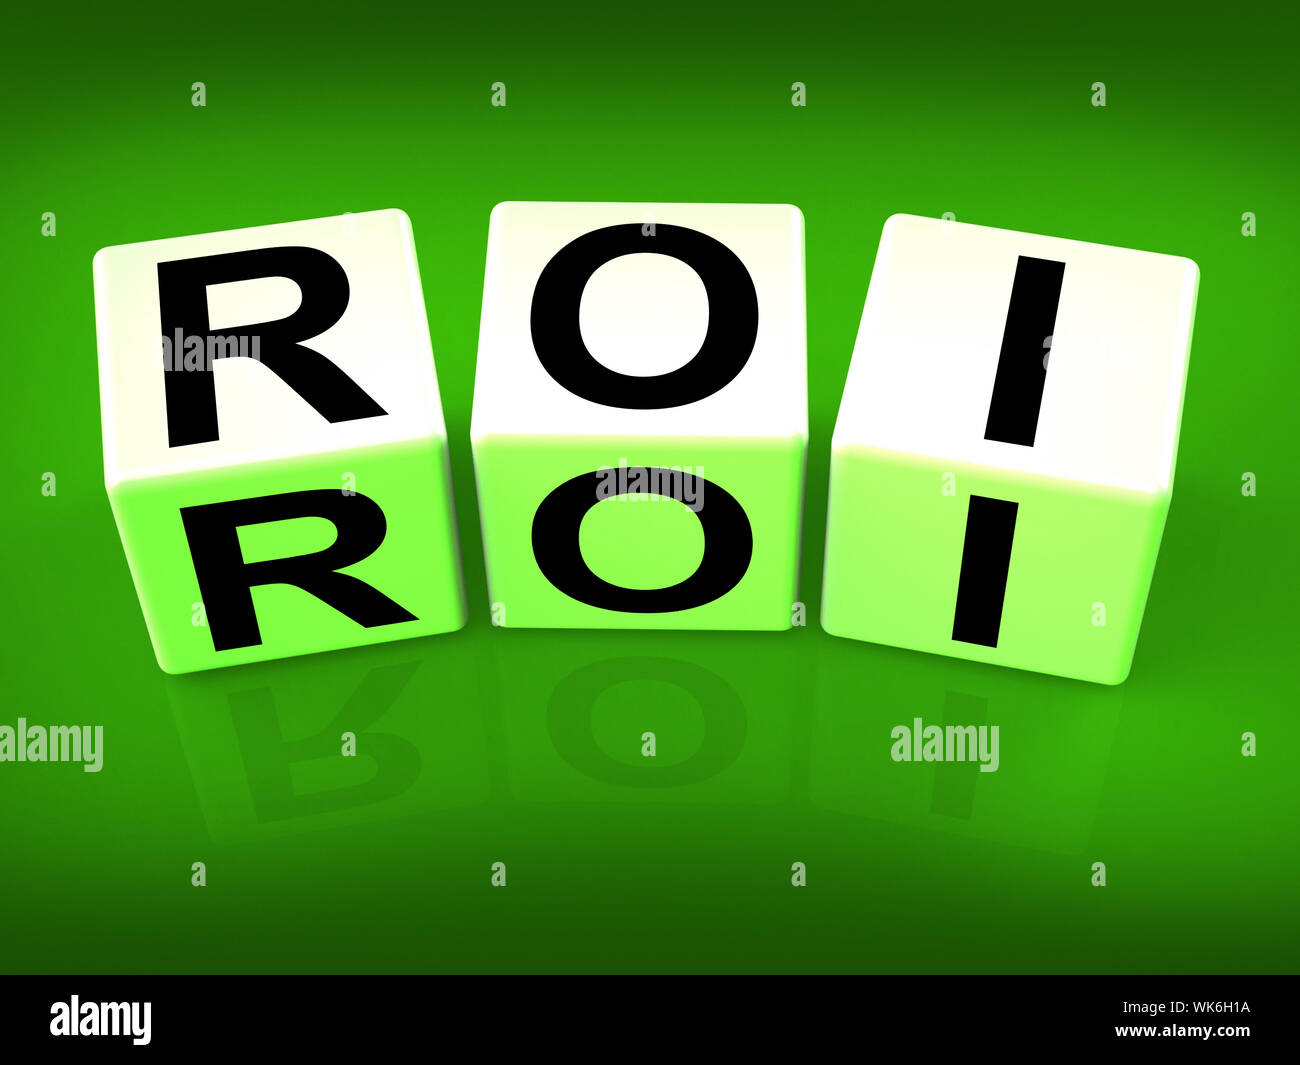 ROI Blocks Meaning Financial Return on Investment Stock Photo